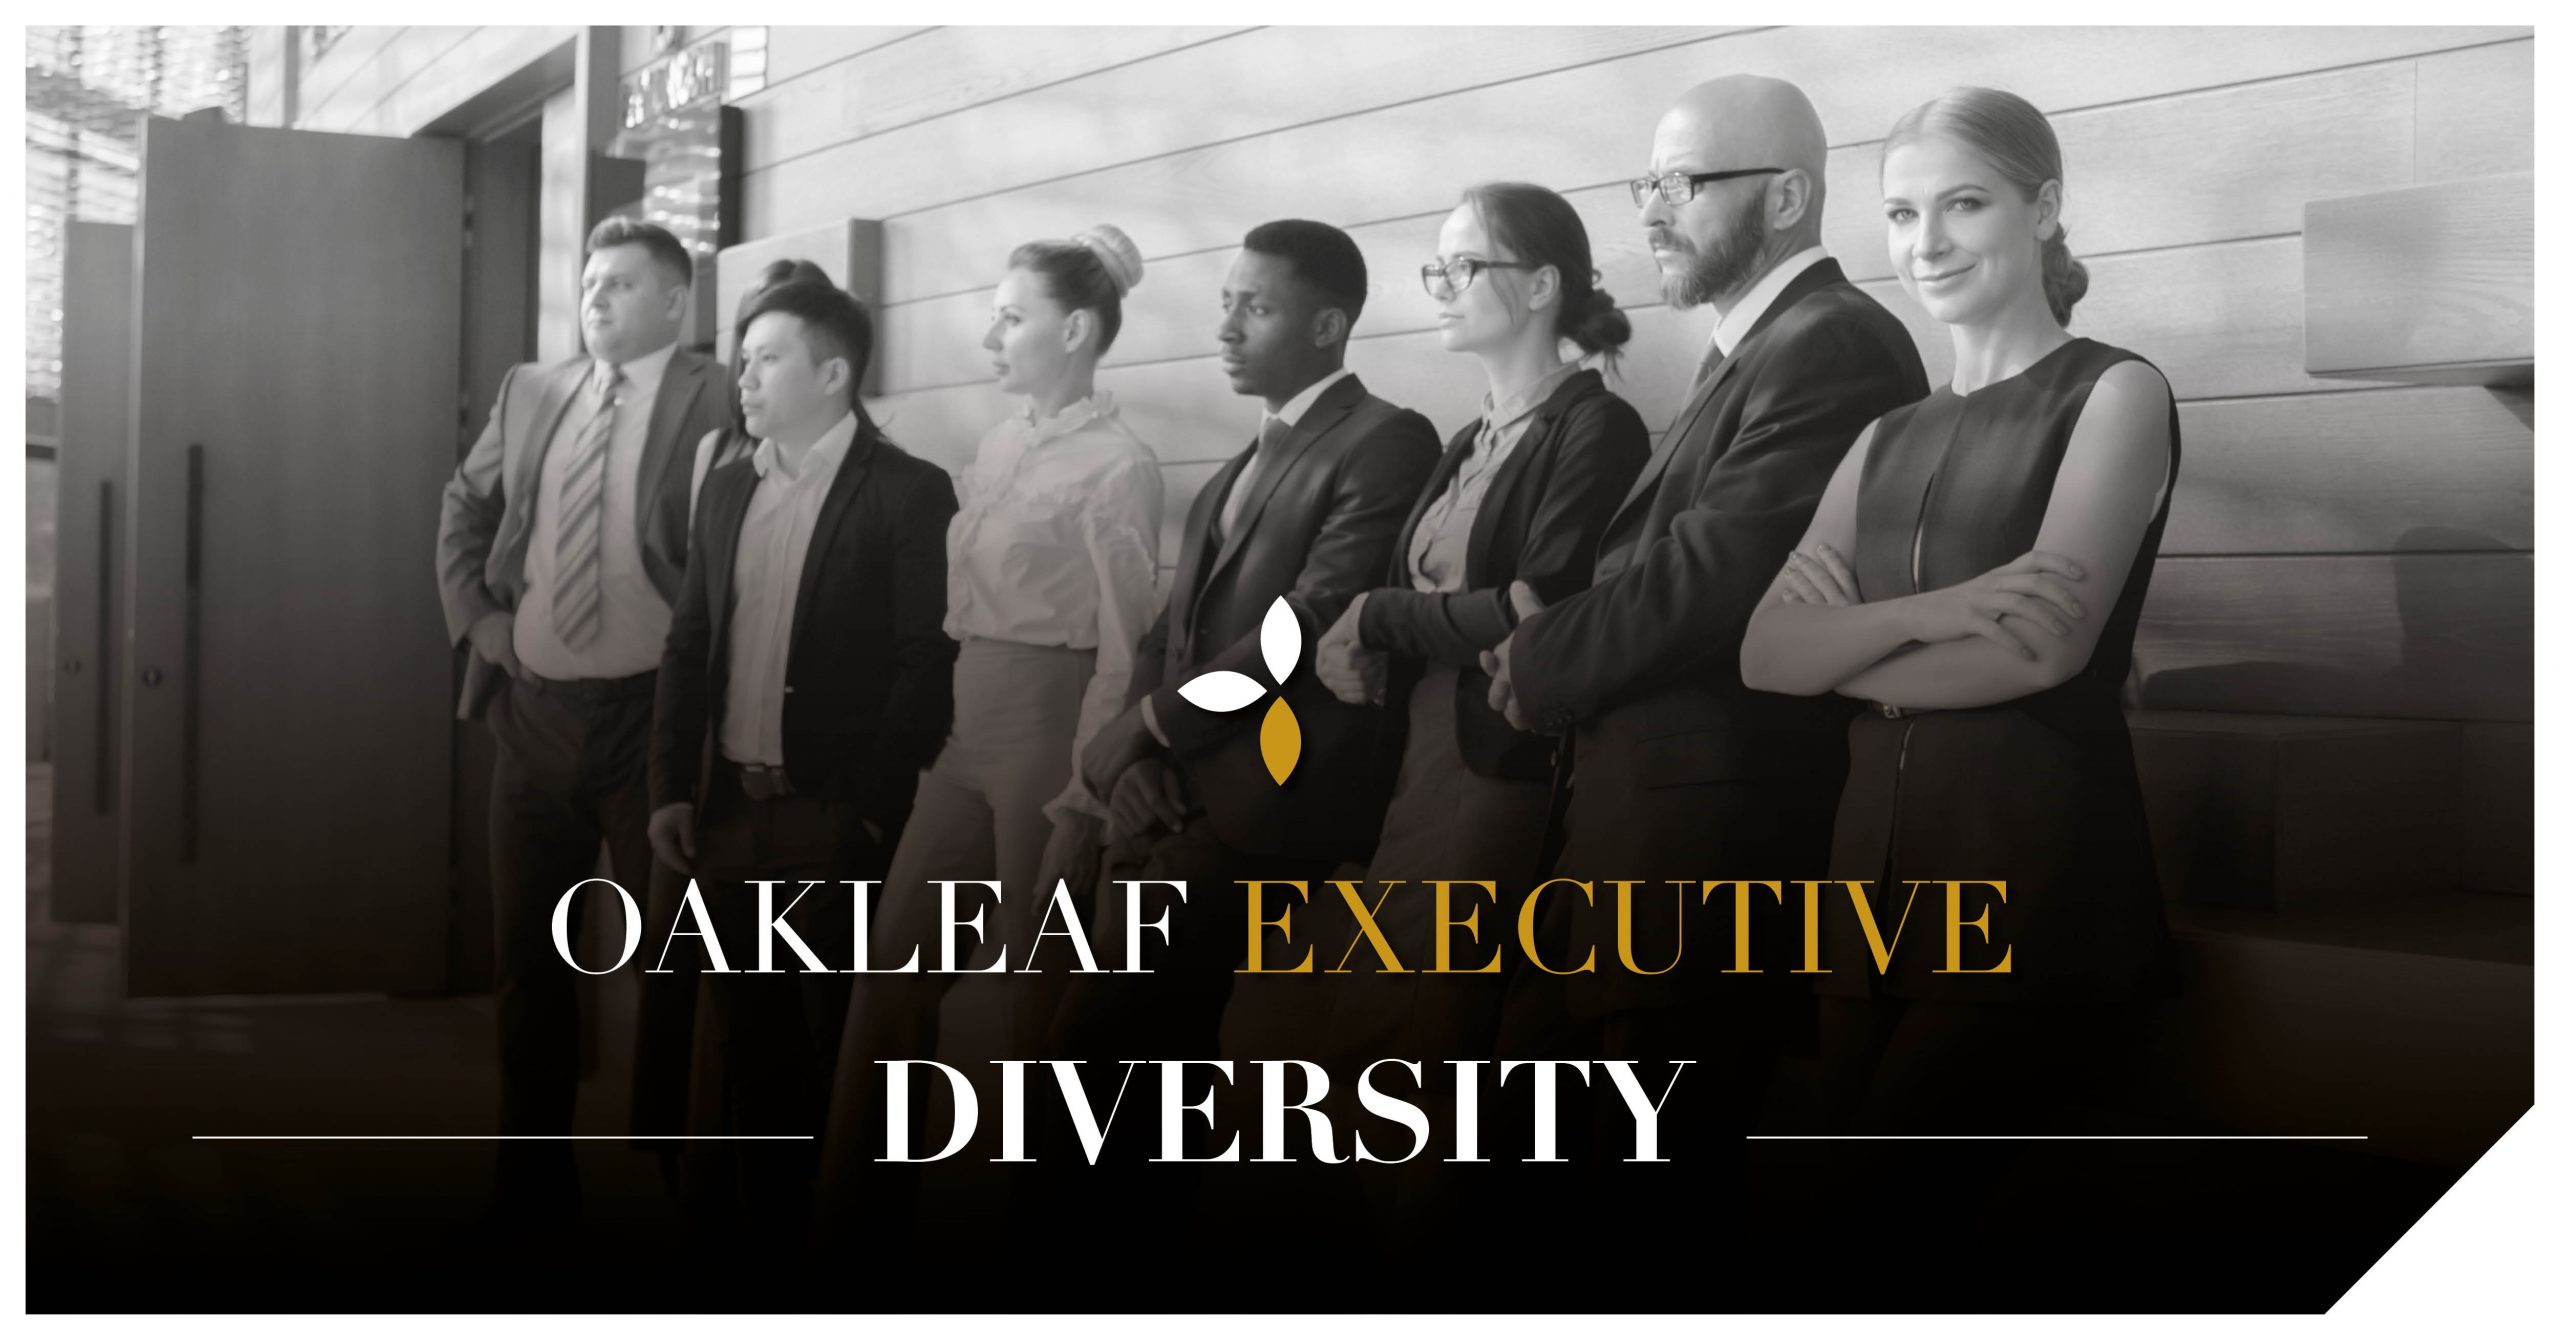 Diversity – Executive recruiters to be more proactive